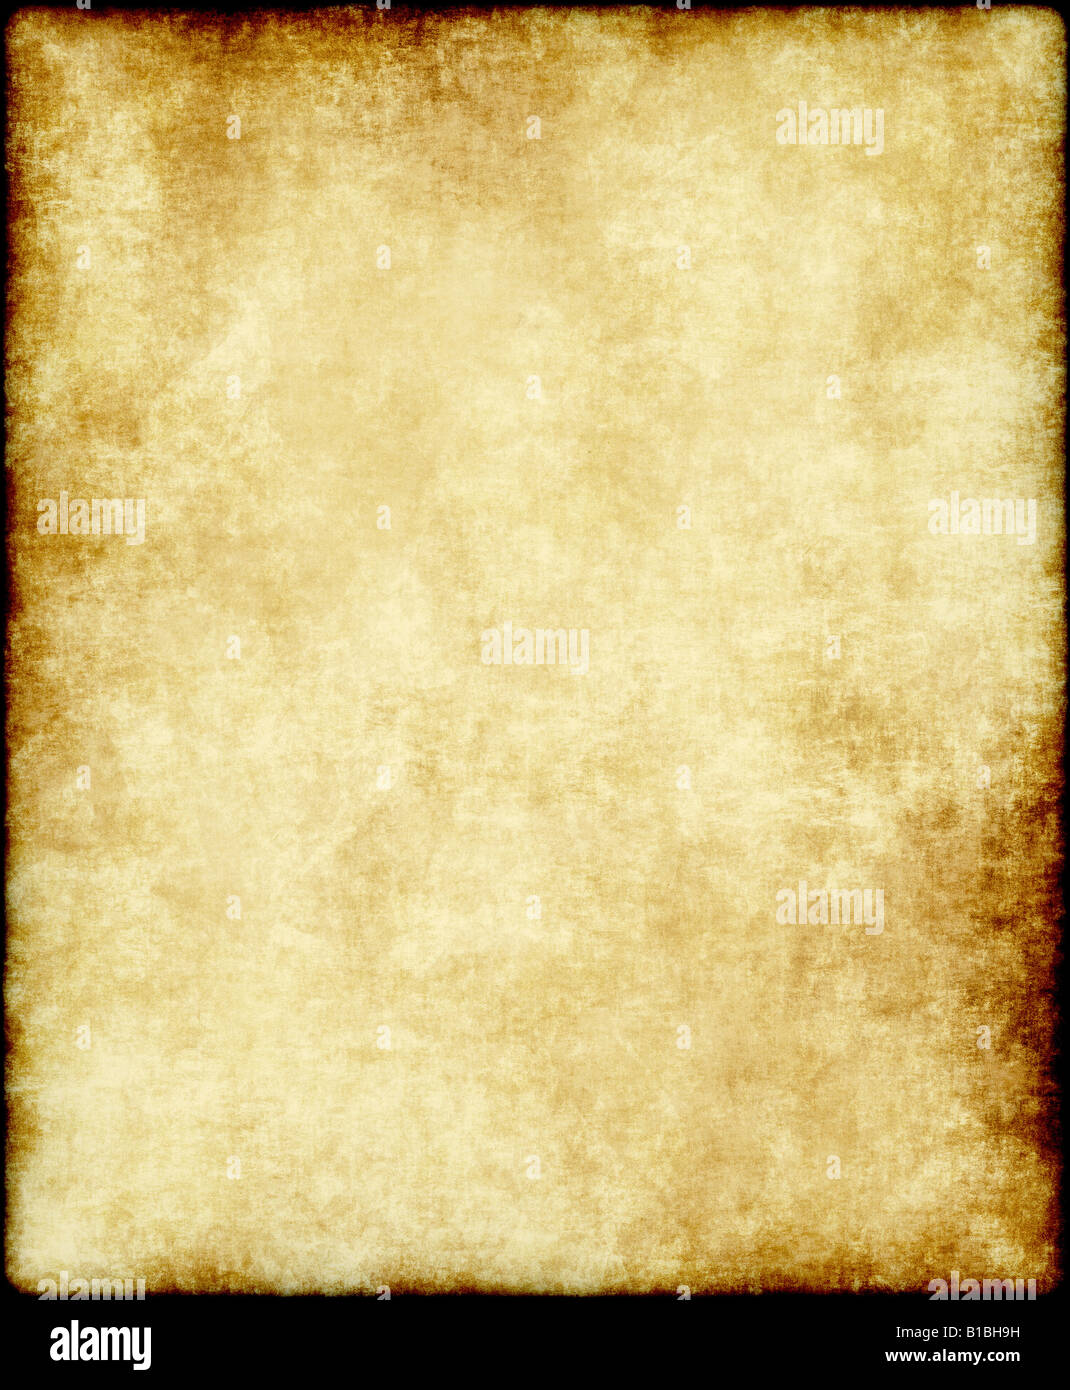 Old Paper or Parchment Texture Stock Image - Image of background